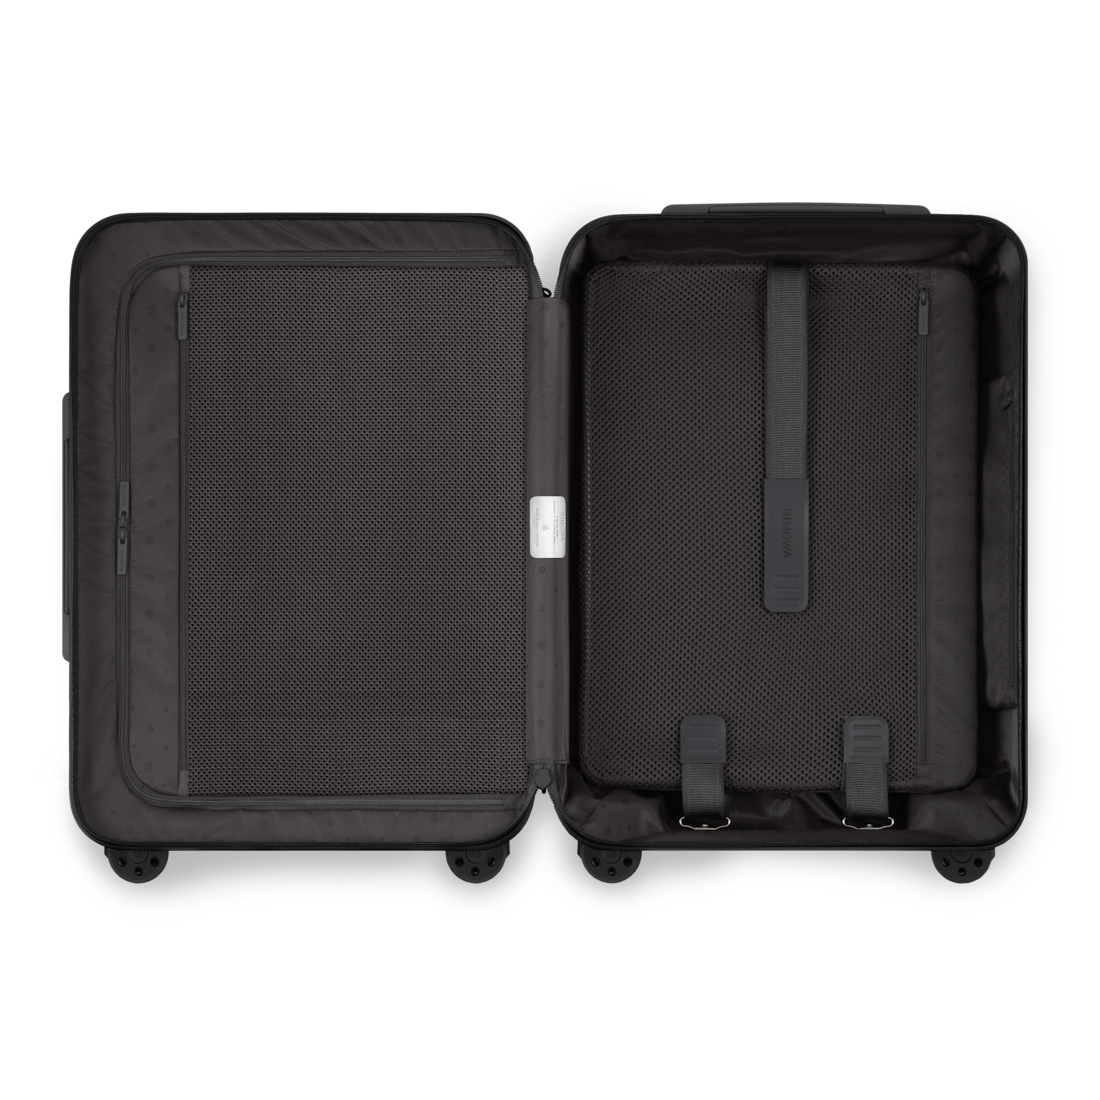 Essential Sleeve Cabin Carry-On Suitcase, Black